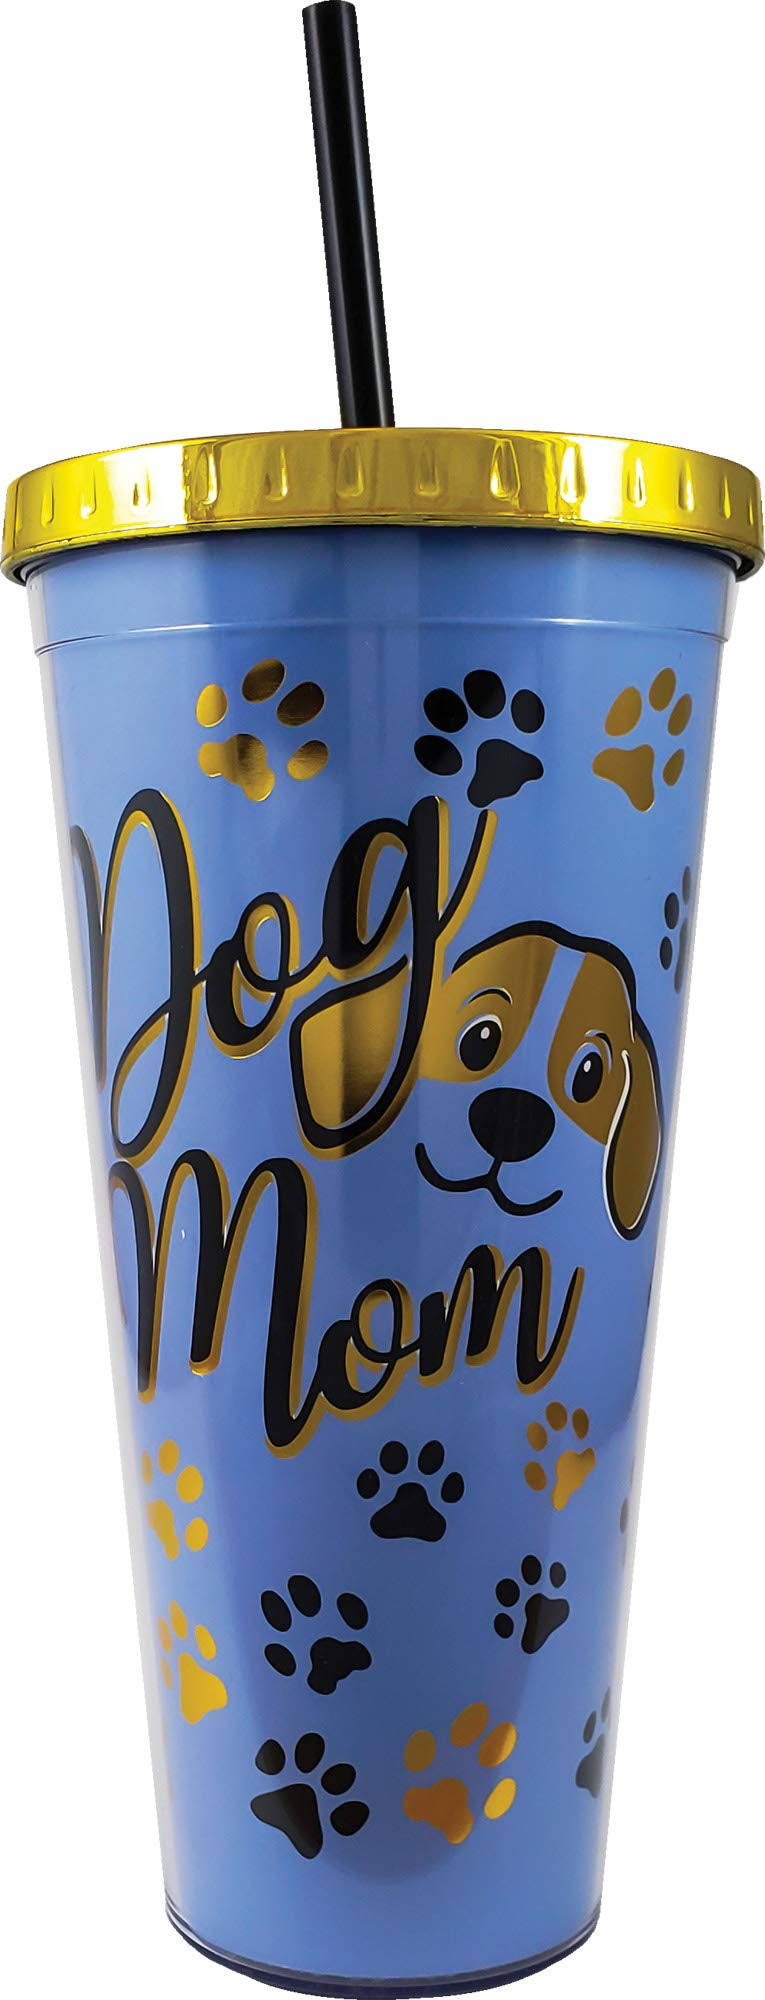 Spoontiques 21631 Dog Foil Cup w/Straw